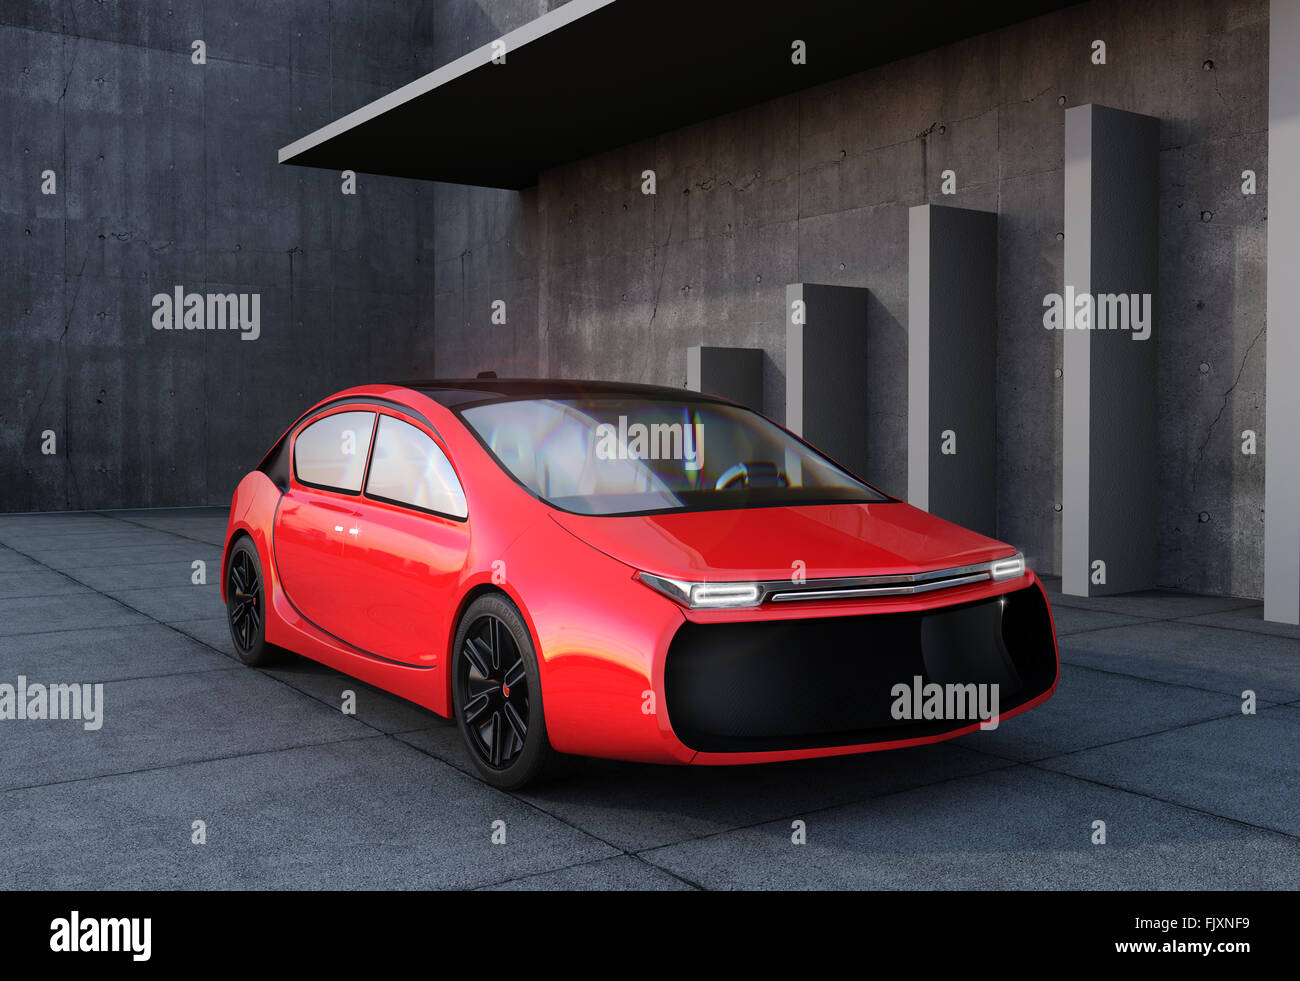 Red electric car and concrete wall. 3D rendering image. Stock Photo